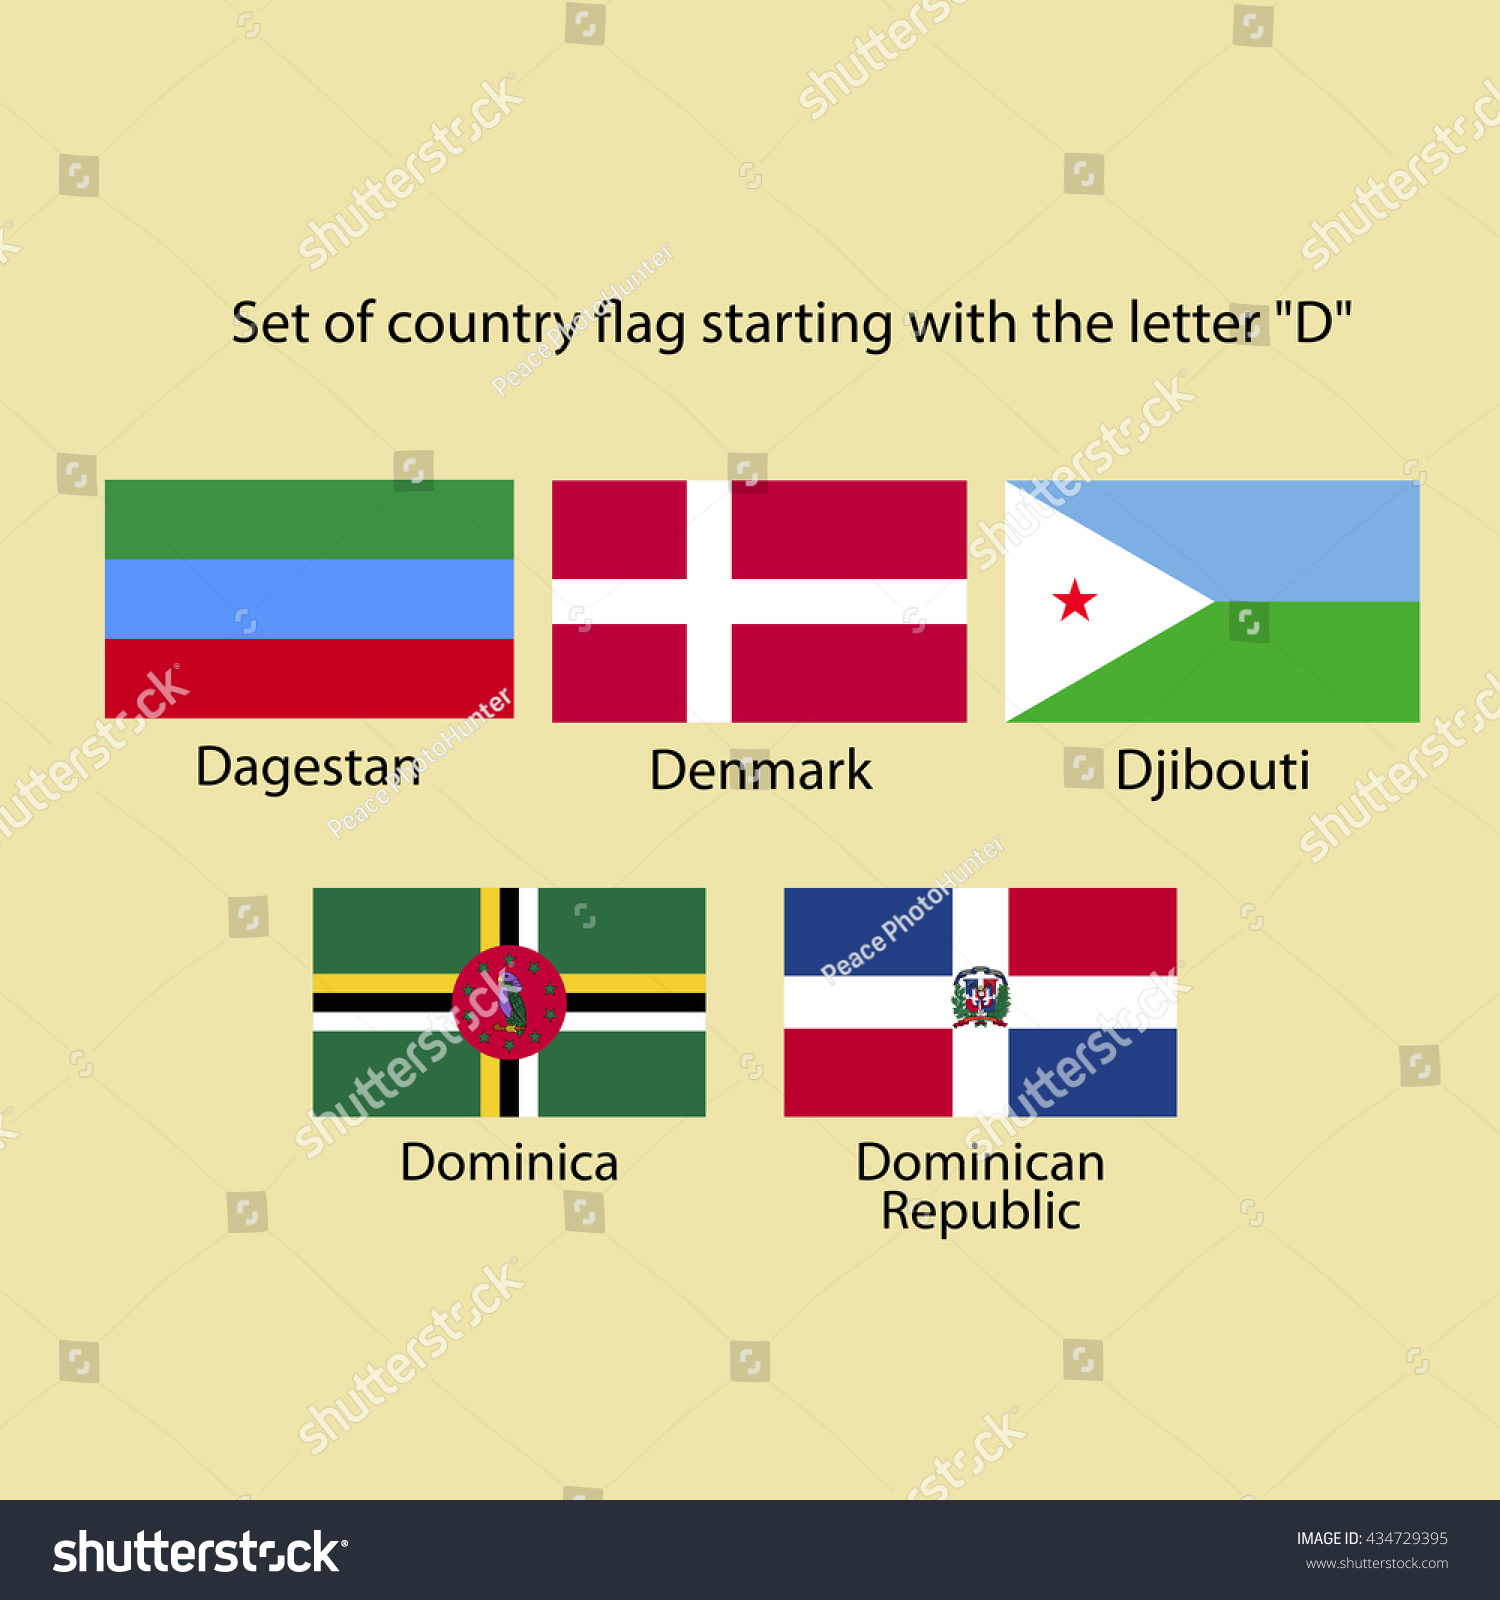 A Country That Starts With The Letter D